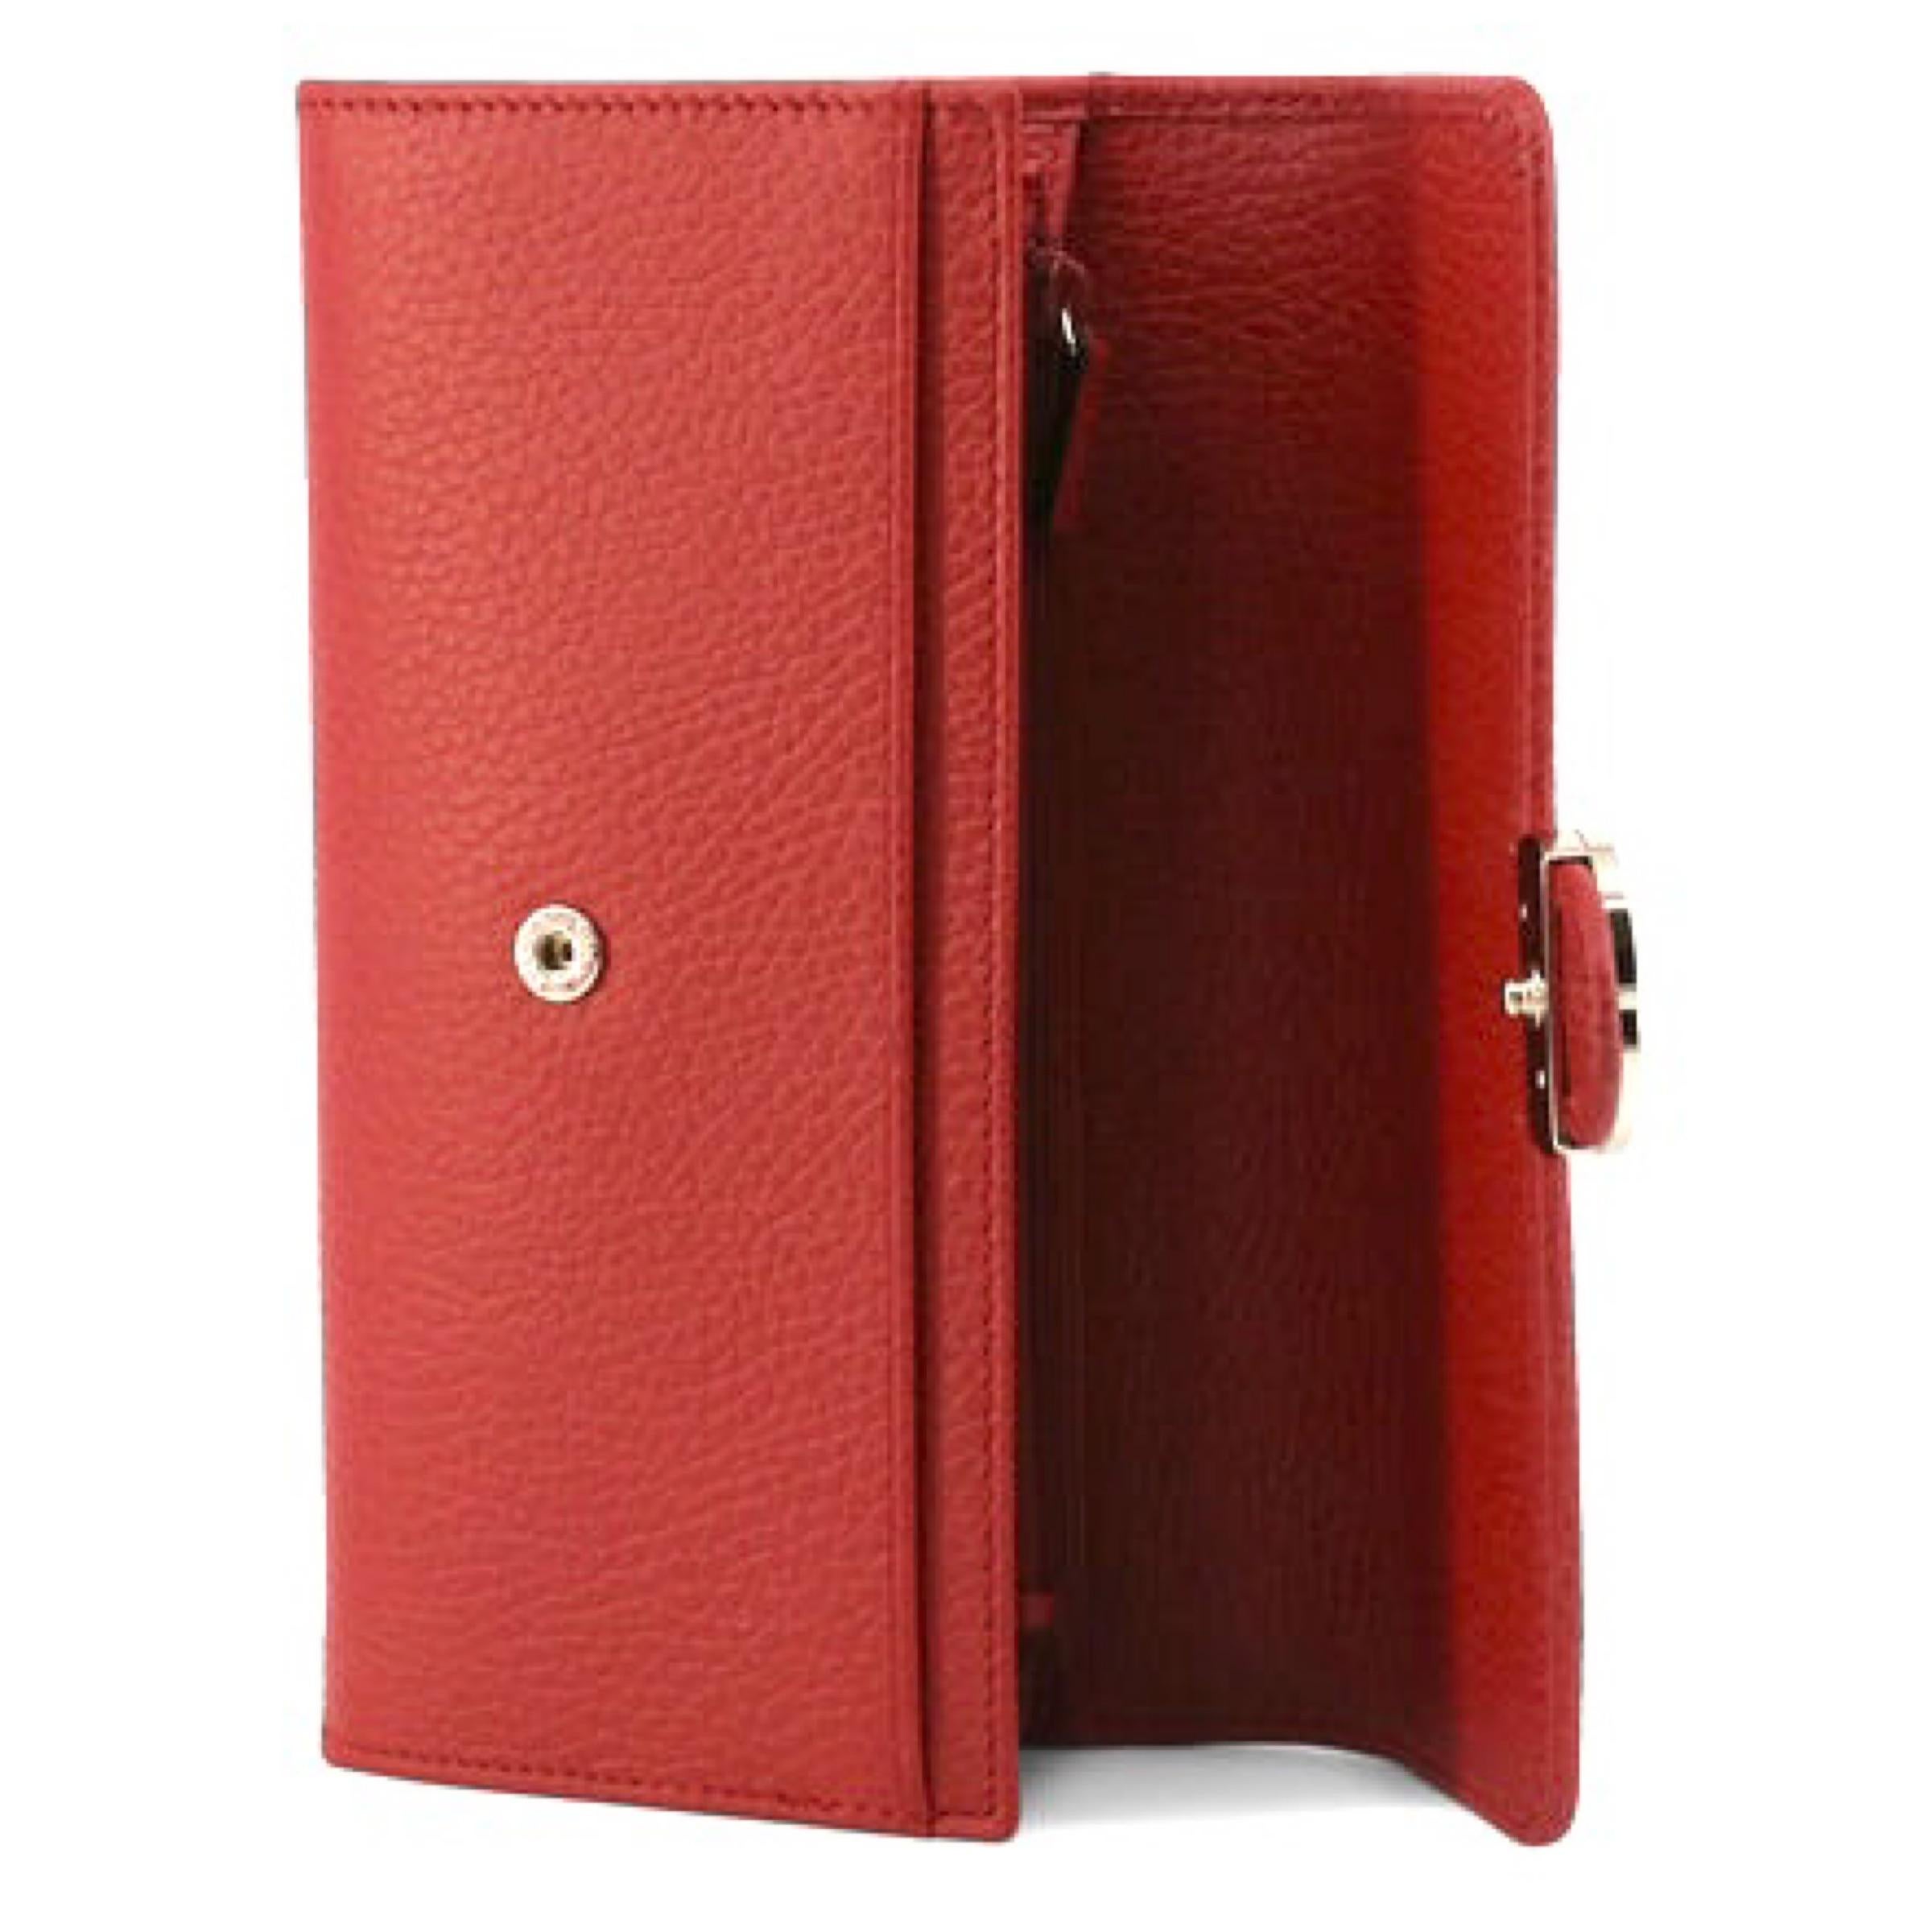 NEW Gucci Red Interlocking G Leather Long Wallet Clutch Bag For Sale 2